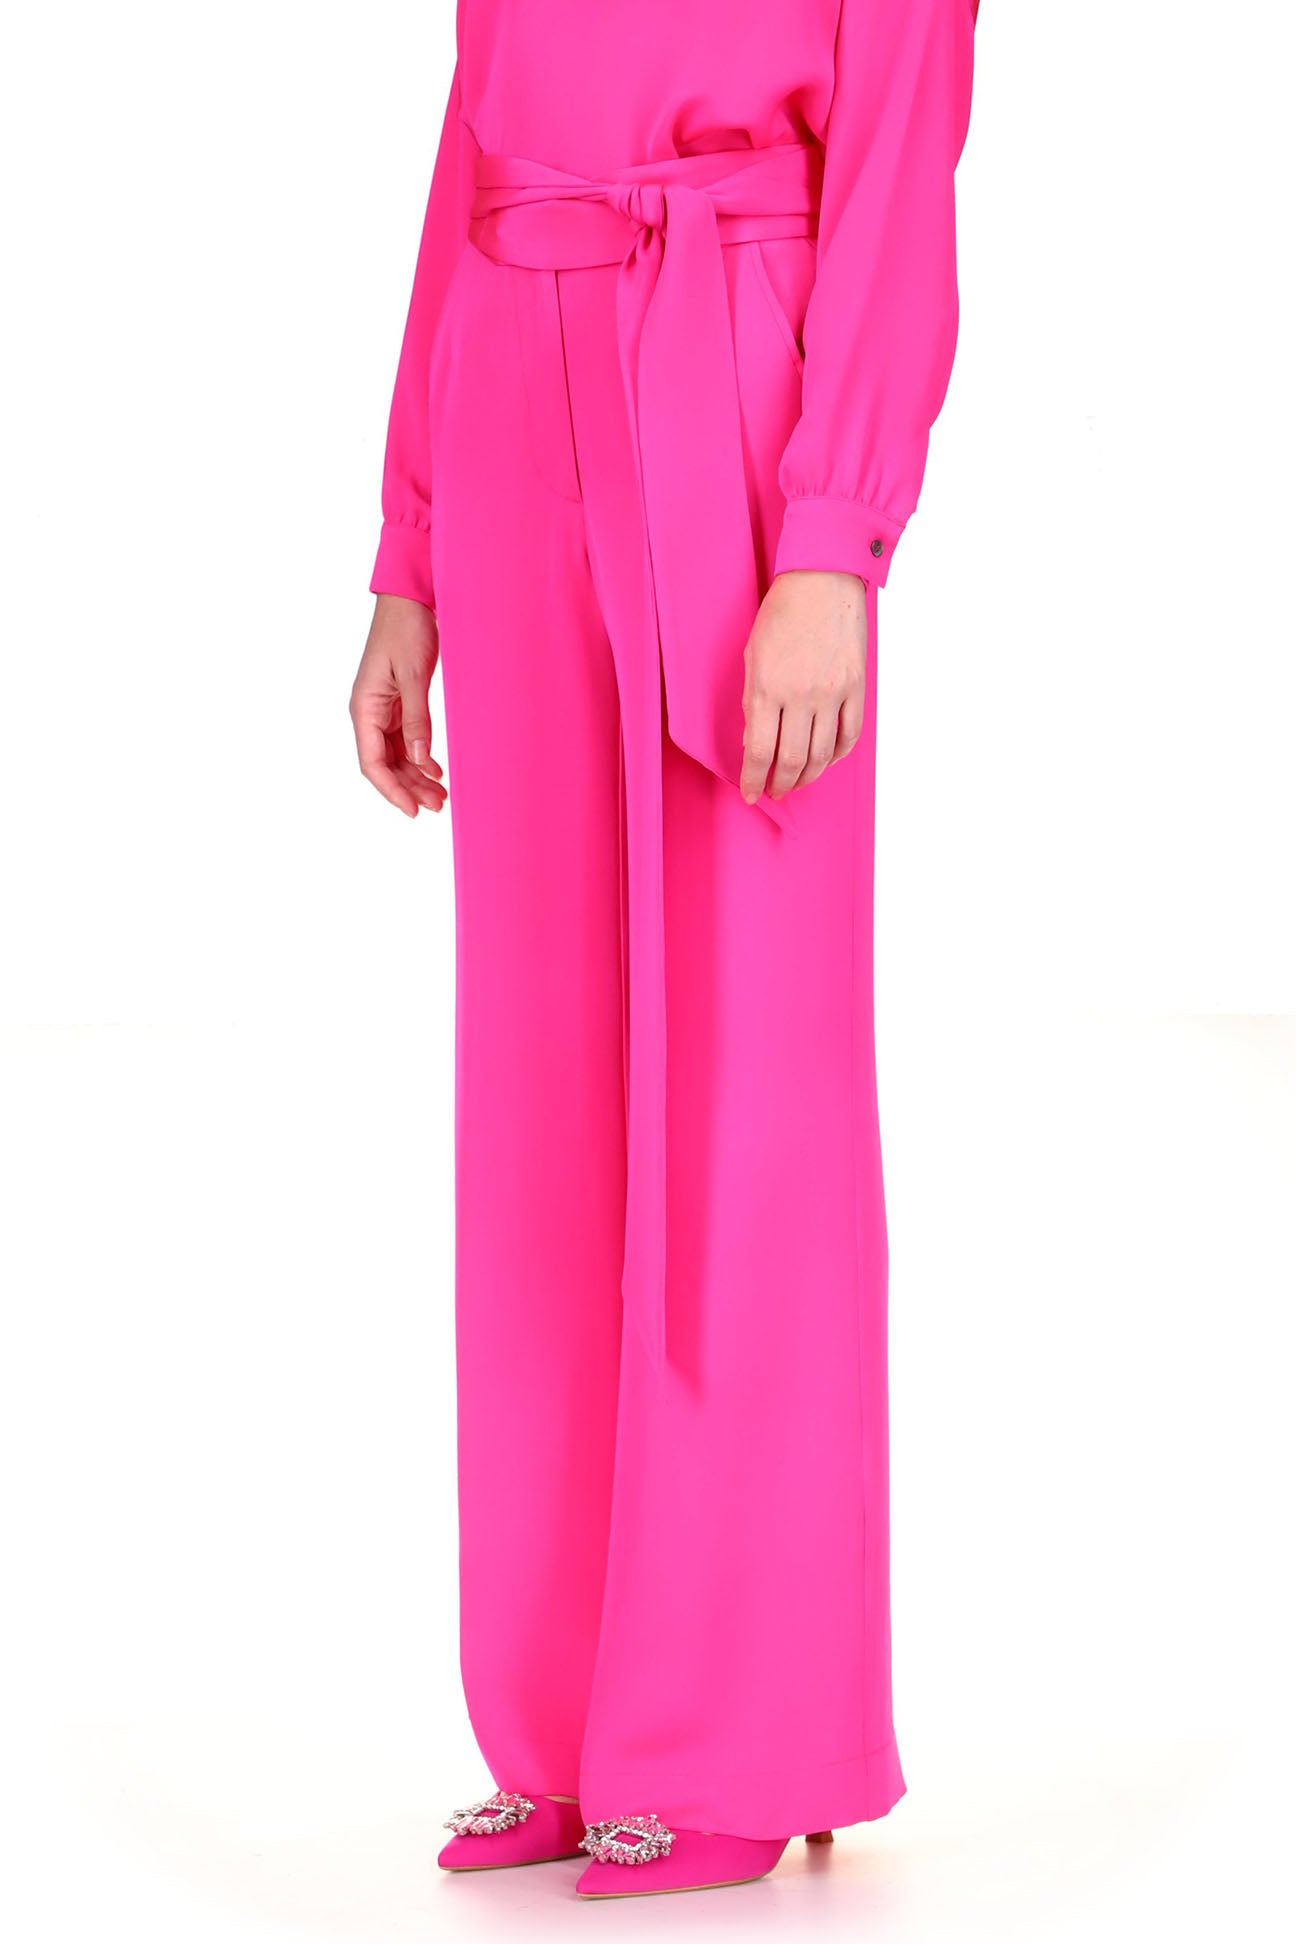 GO COLORS Shiny Pant XL (Dark Pink) in Vijayawada at best price by Go  Colors - Justdial